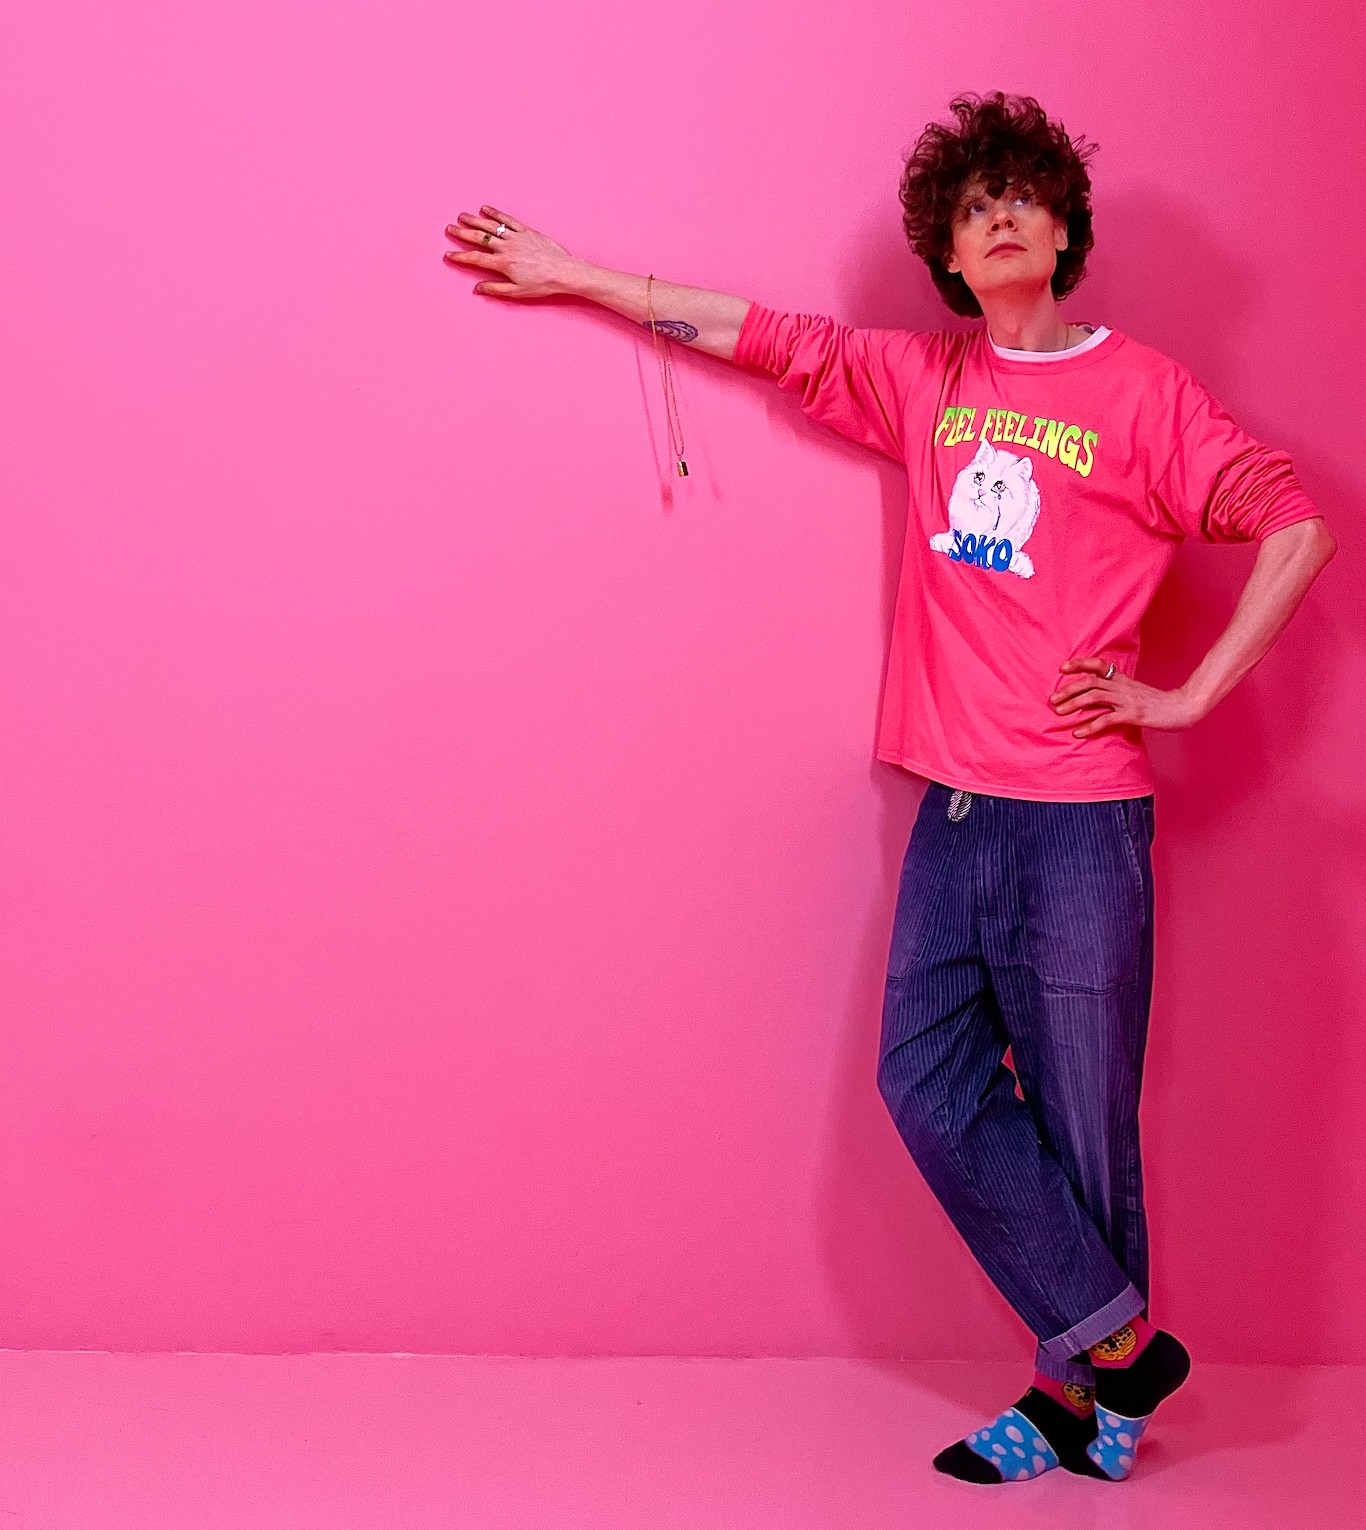 Michael Pedersen, a white man with curly dark hair, stands against a bright pink background with one arm leaning on the back and one on his hip. He wears dark trousers and a bright pint sweatshirt with a white image